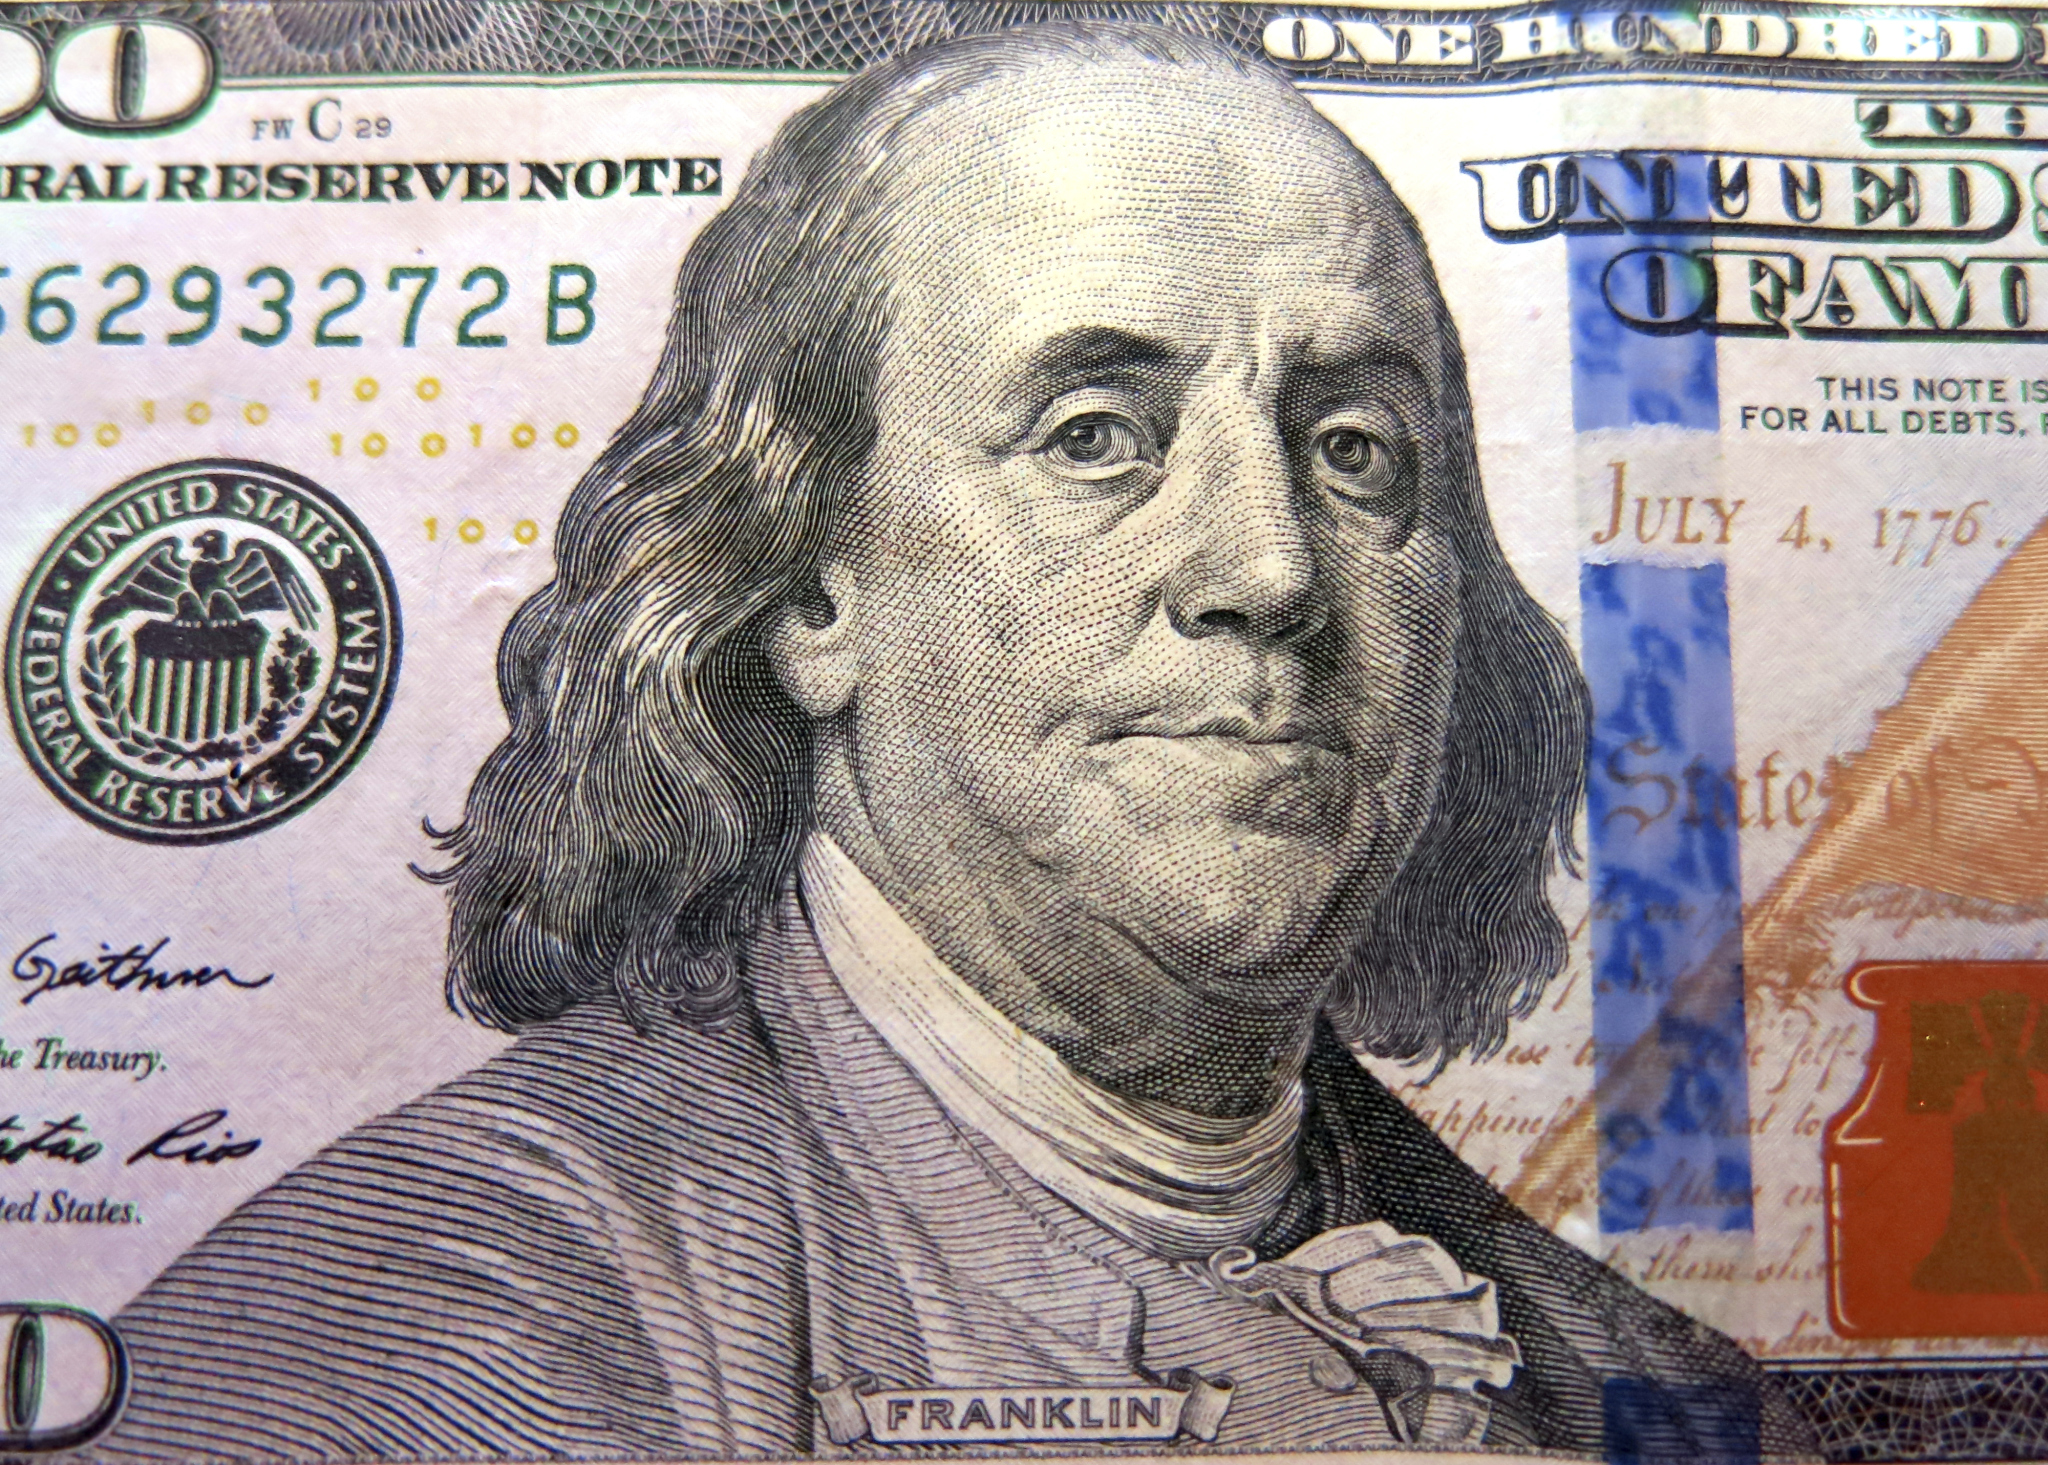 Benjamin Franklin on a US bank note